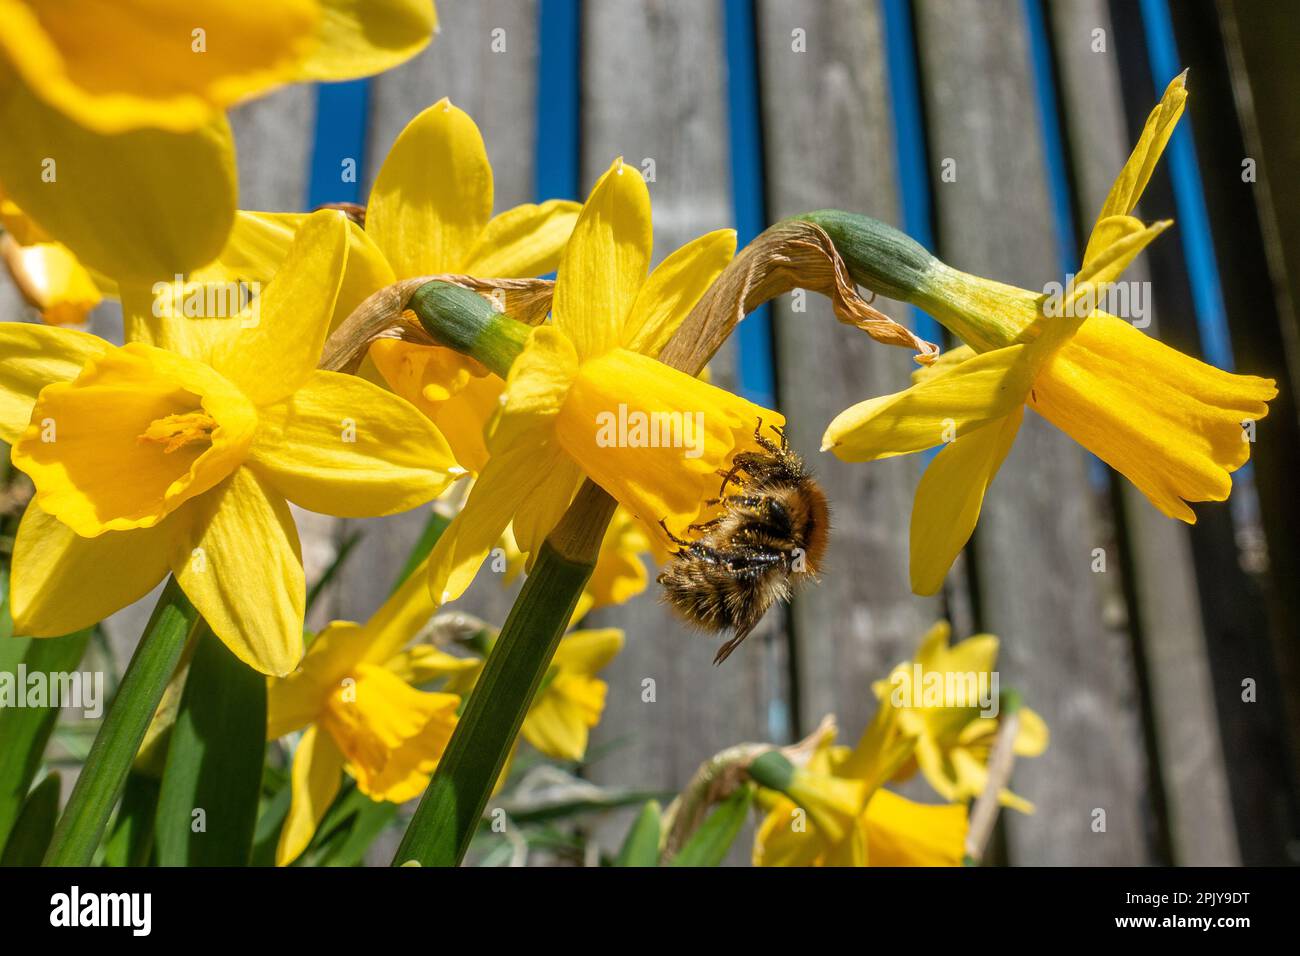 UK wildlife - 4 April 2023 - An unusual sight of a common carder bee (Bombus pascuorum) drinking nectar from daffodils (narcissus 'Tête-à-Tête') and covered in pollen in a West Yorkshire garden, Burley-in-Wharfedale, England, UK.  Credit: Rebecca Cole/Alamy Live News Stock Photo